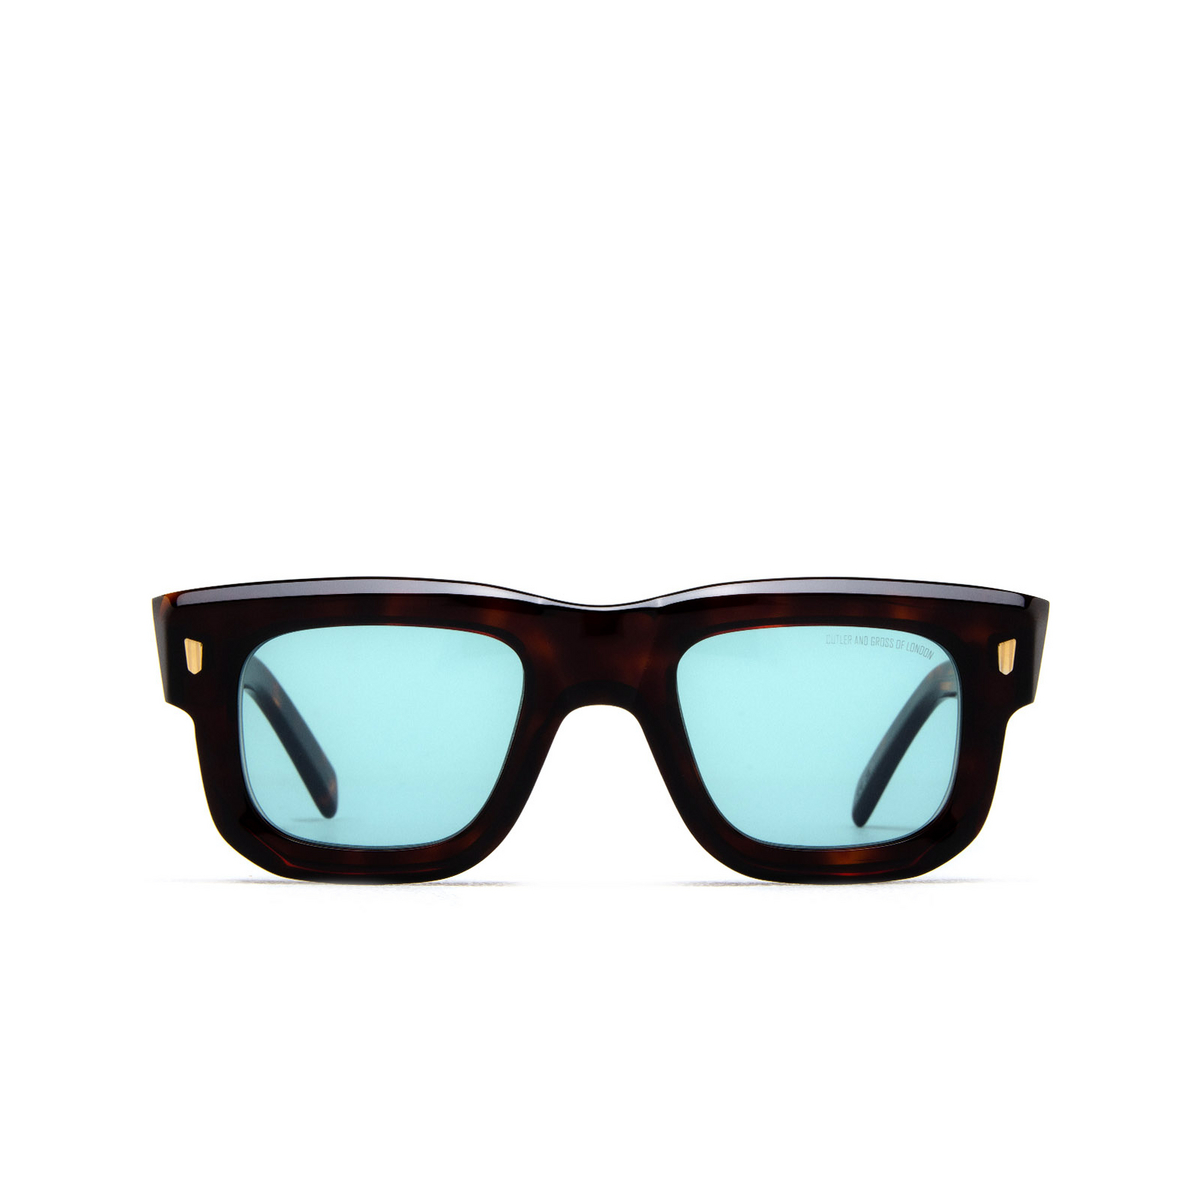 Cutler and Gross 1402 Sunglasses 03 Dark Turtle - front view